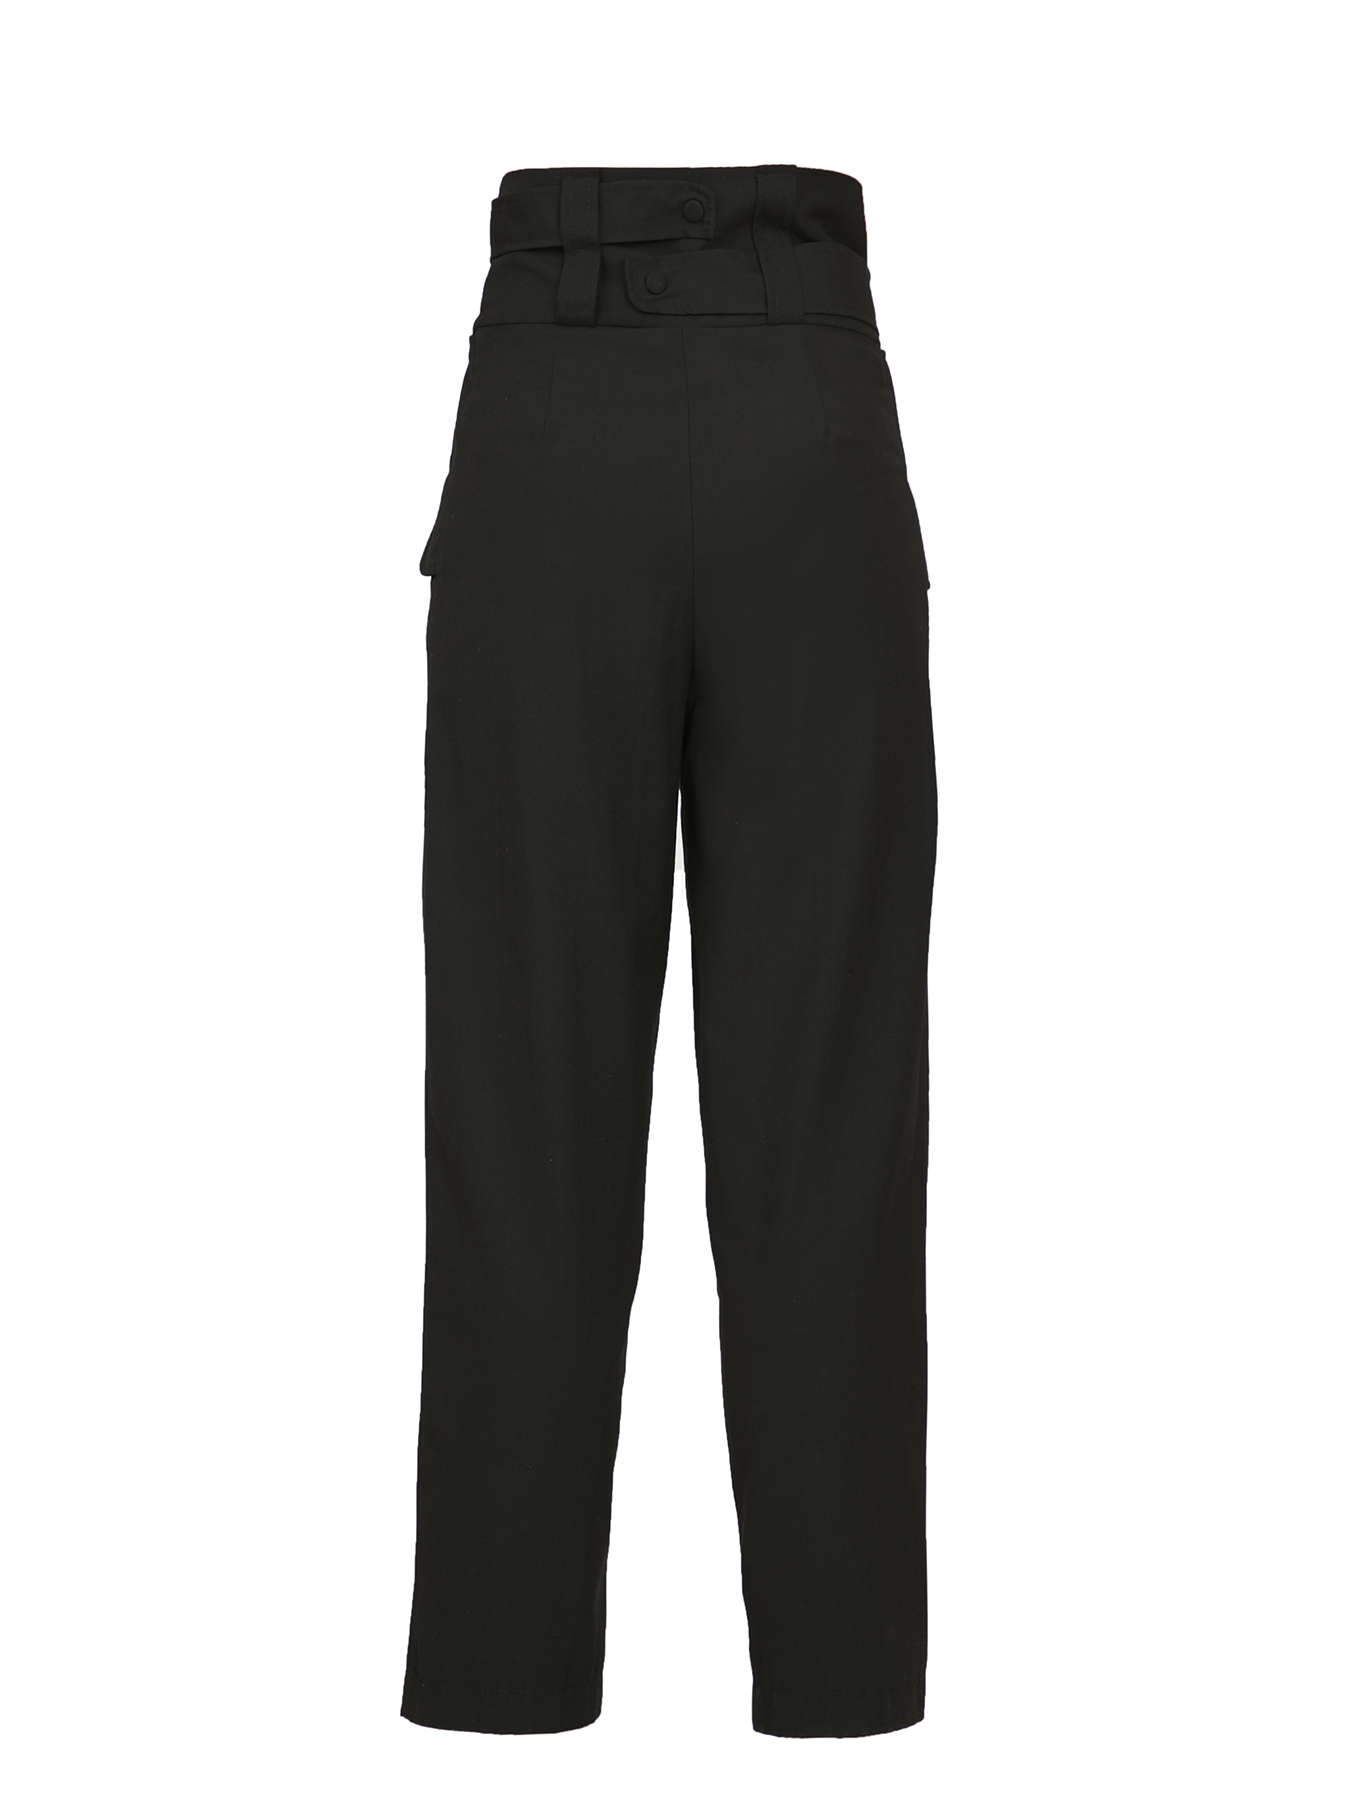 AW21-22. High-waisted black trousers